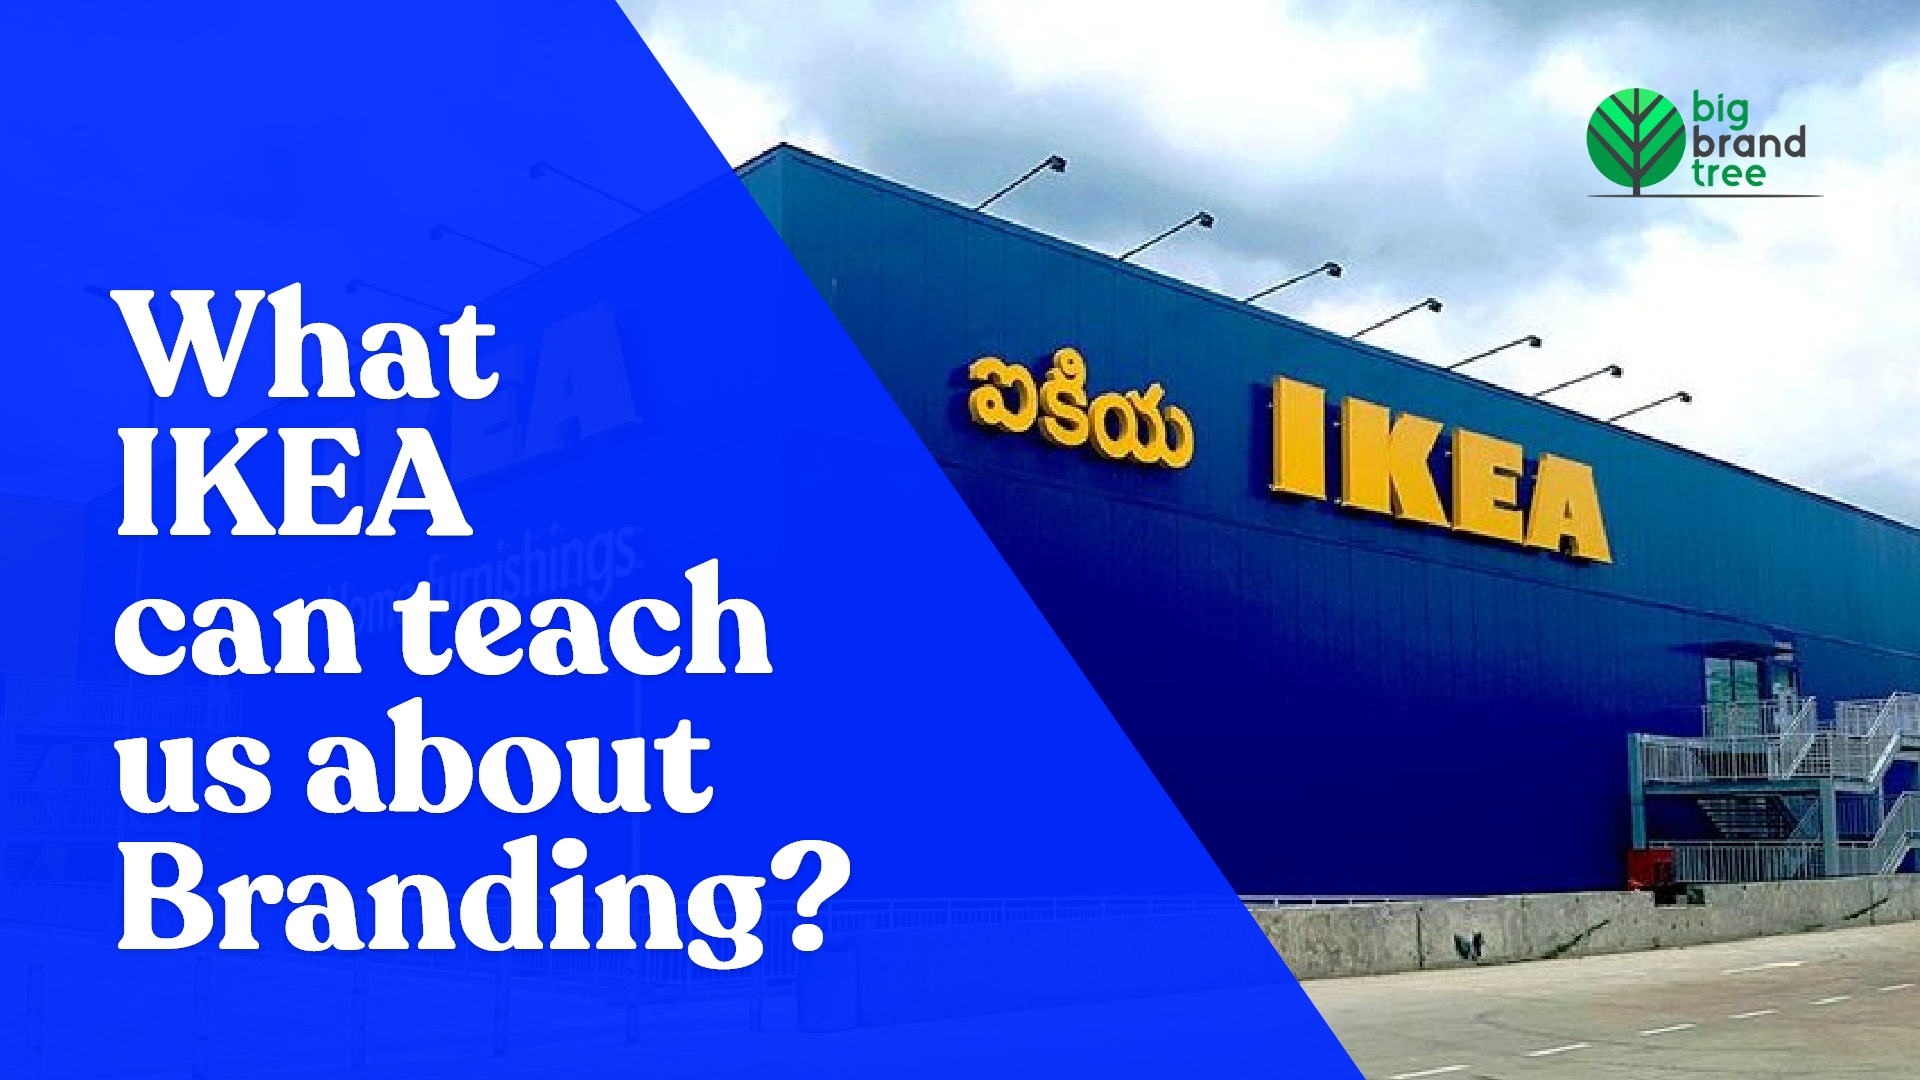 What IKEA can teach us about branding?